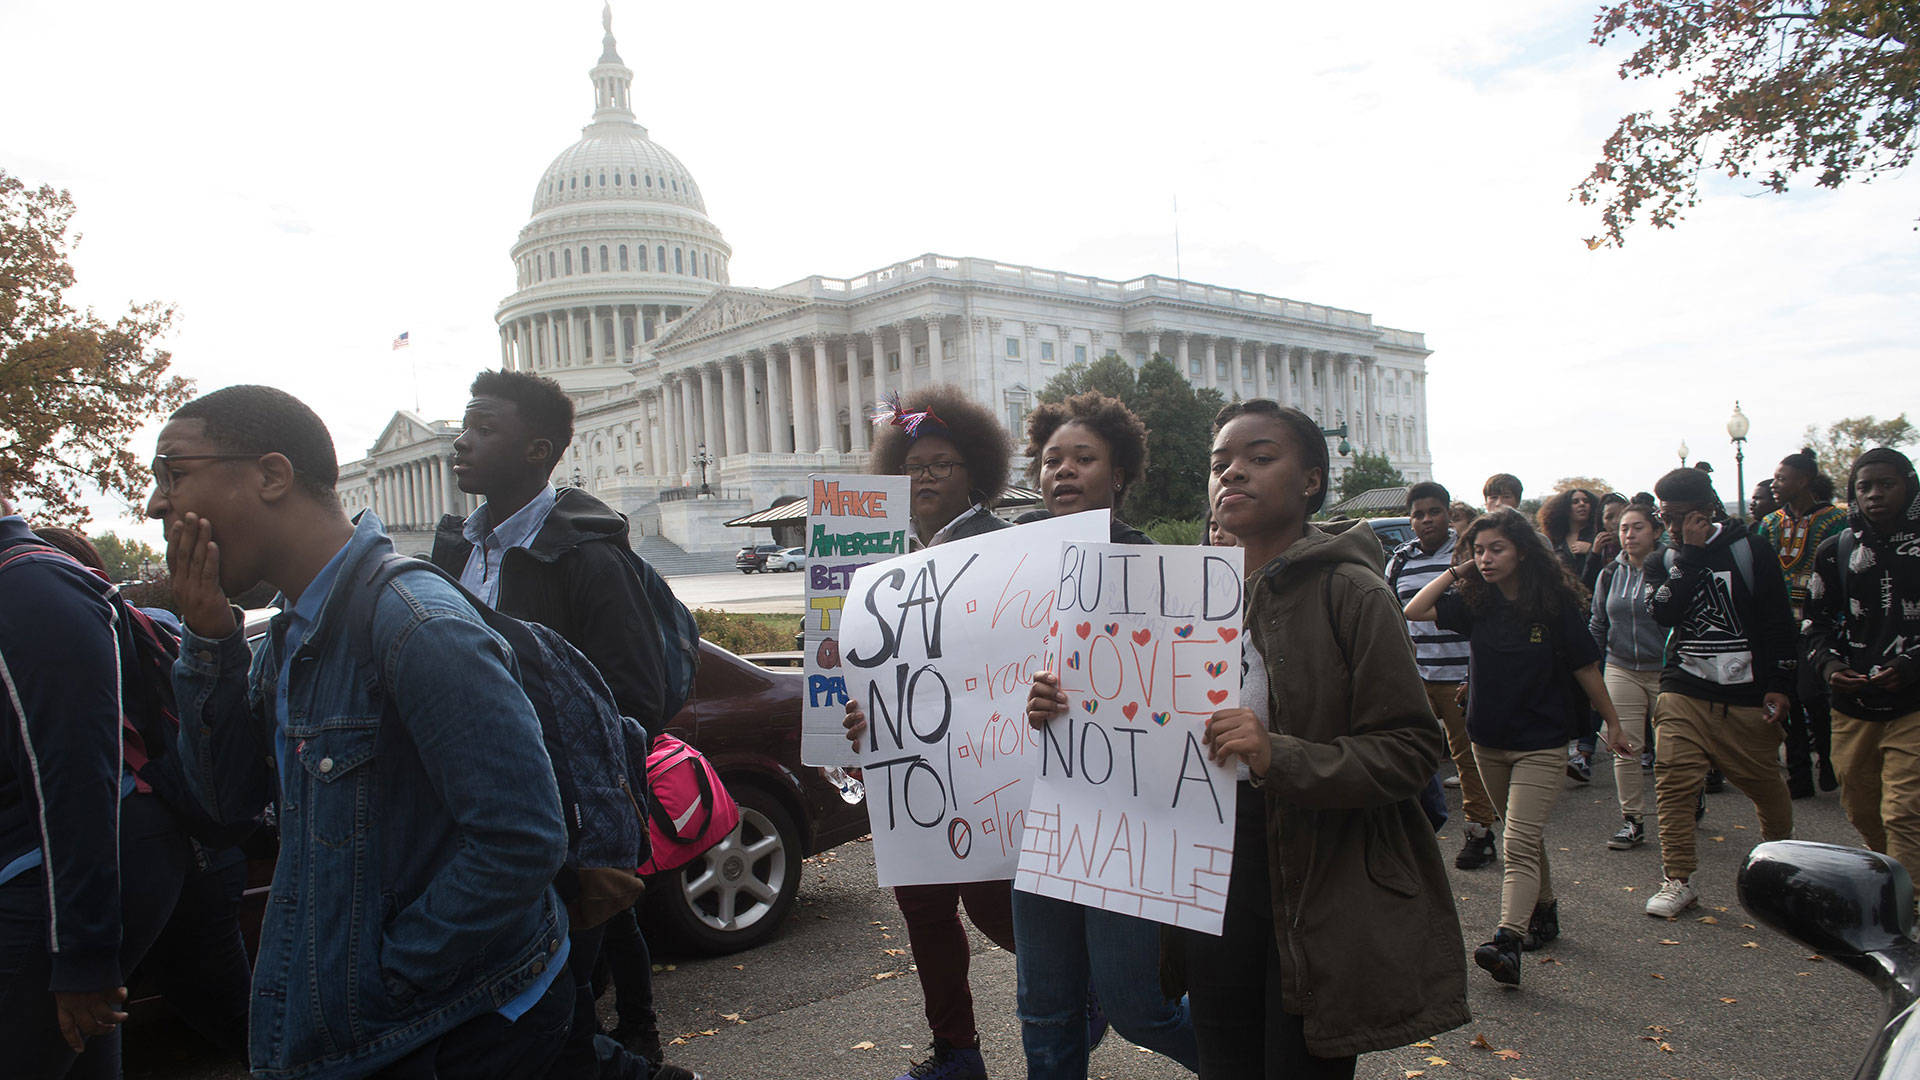 Secondary school students holds signs in front of the US Capitol in Washington, DC, on November 15, 2016 as they protest the election of US President-elect Donald Trump. Photo: Nicholas Kamm/AFP/Getty Images